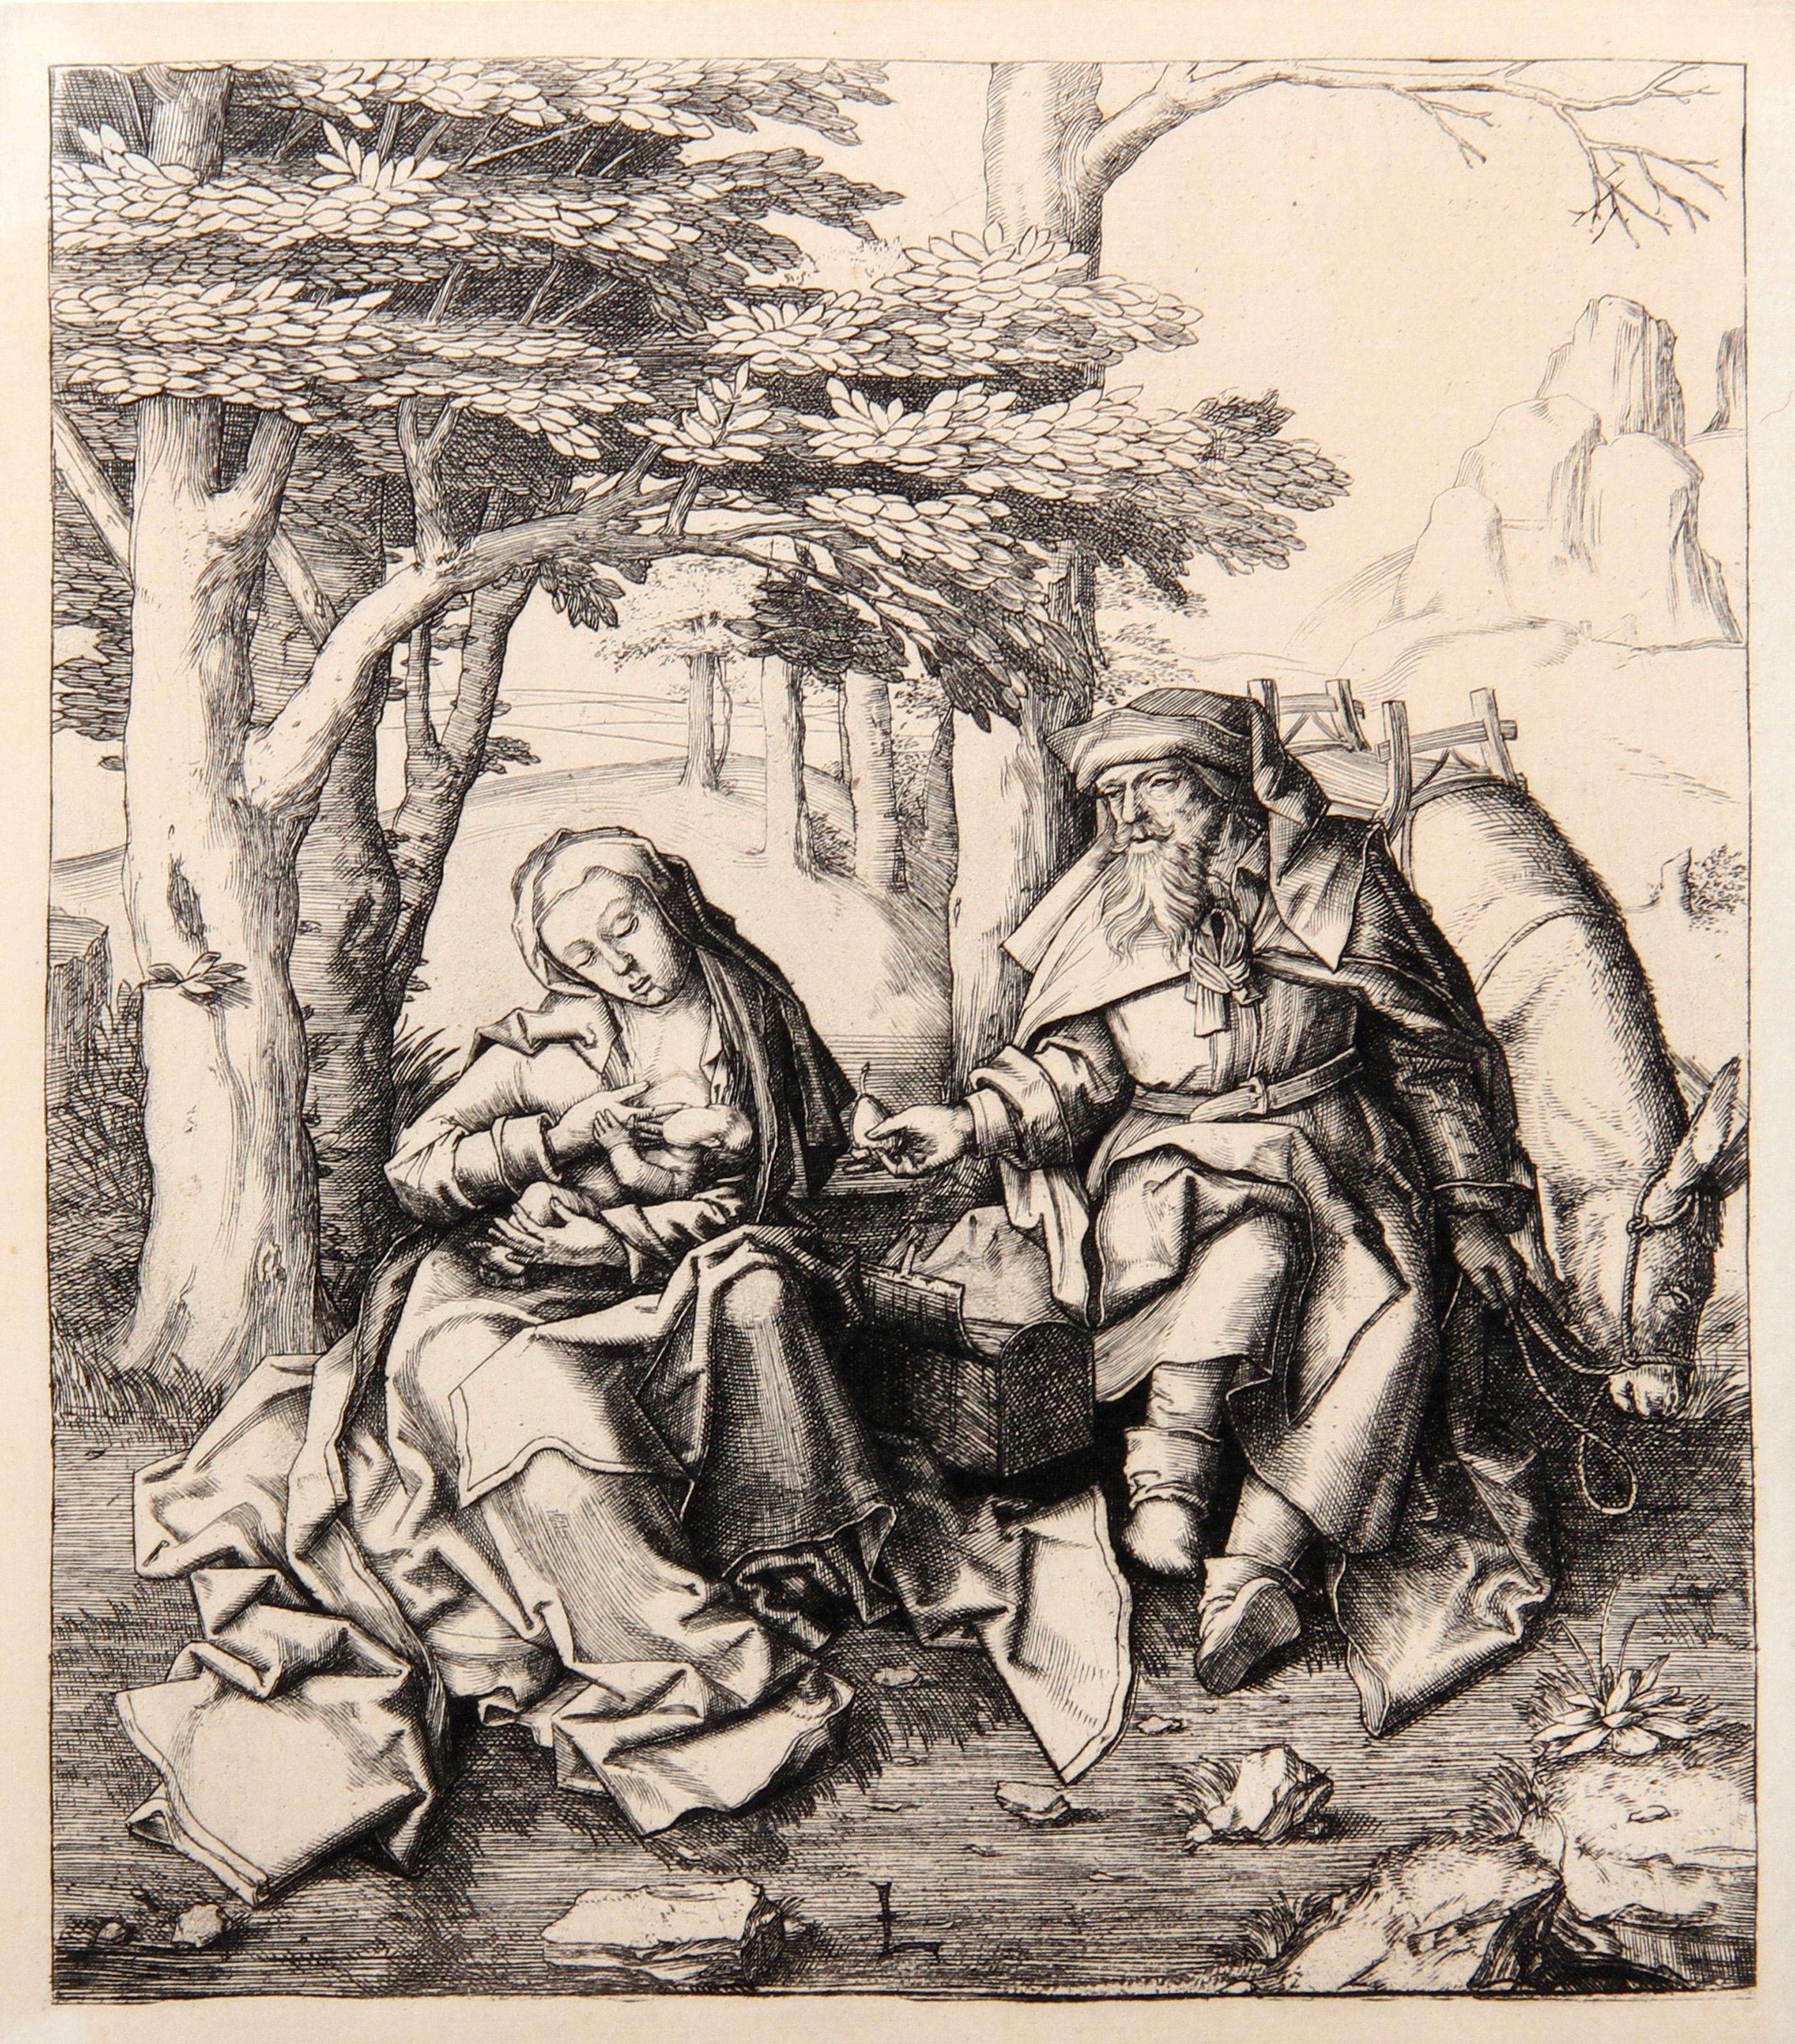 Artist: Lucas van Leyden, After by Amand Durand, Dutch (1494 - 1533) - Le repos en Egypte, Year: 1873, Medium: Heliogravure, Size: 7  x 5.75 in. (17.78  x 14.61 cm), Printer: Amand Durand, Description: French Engraver and painter Charles Amand